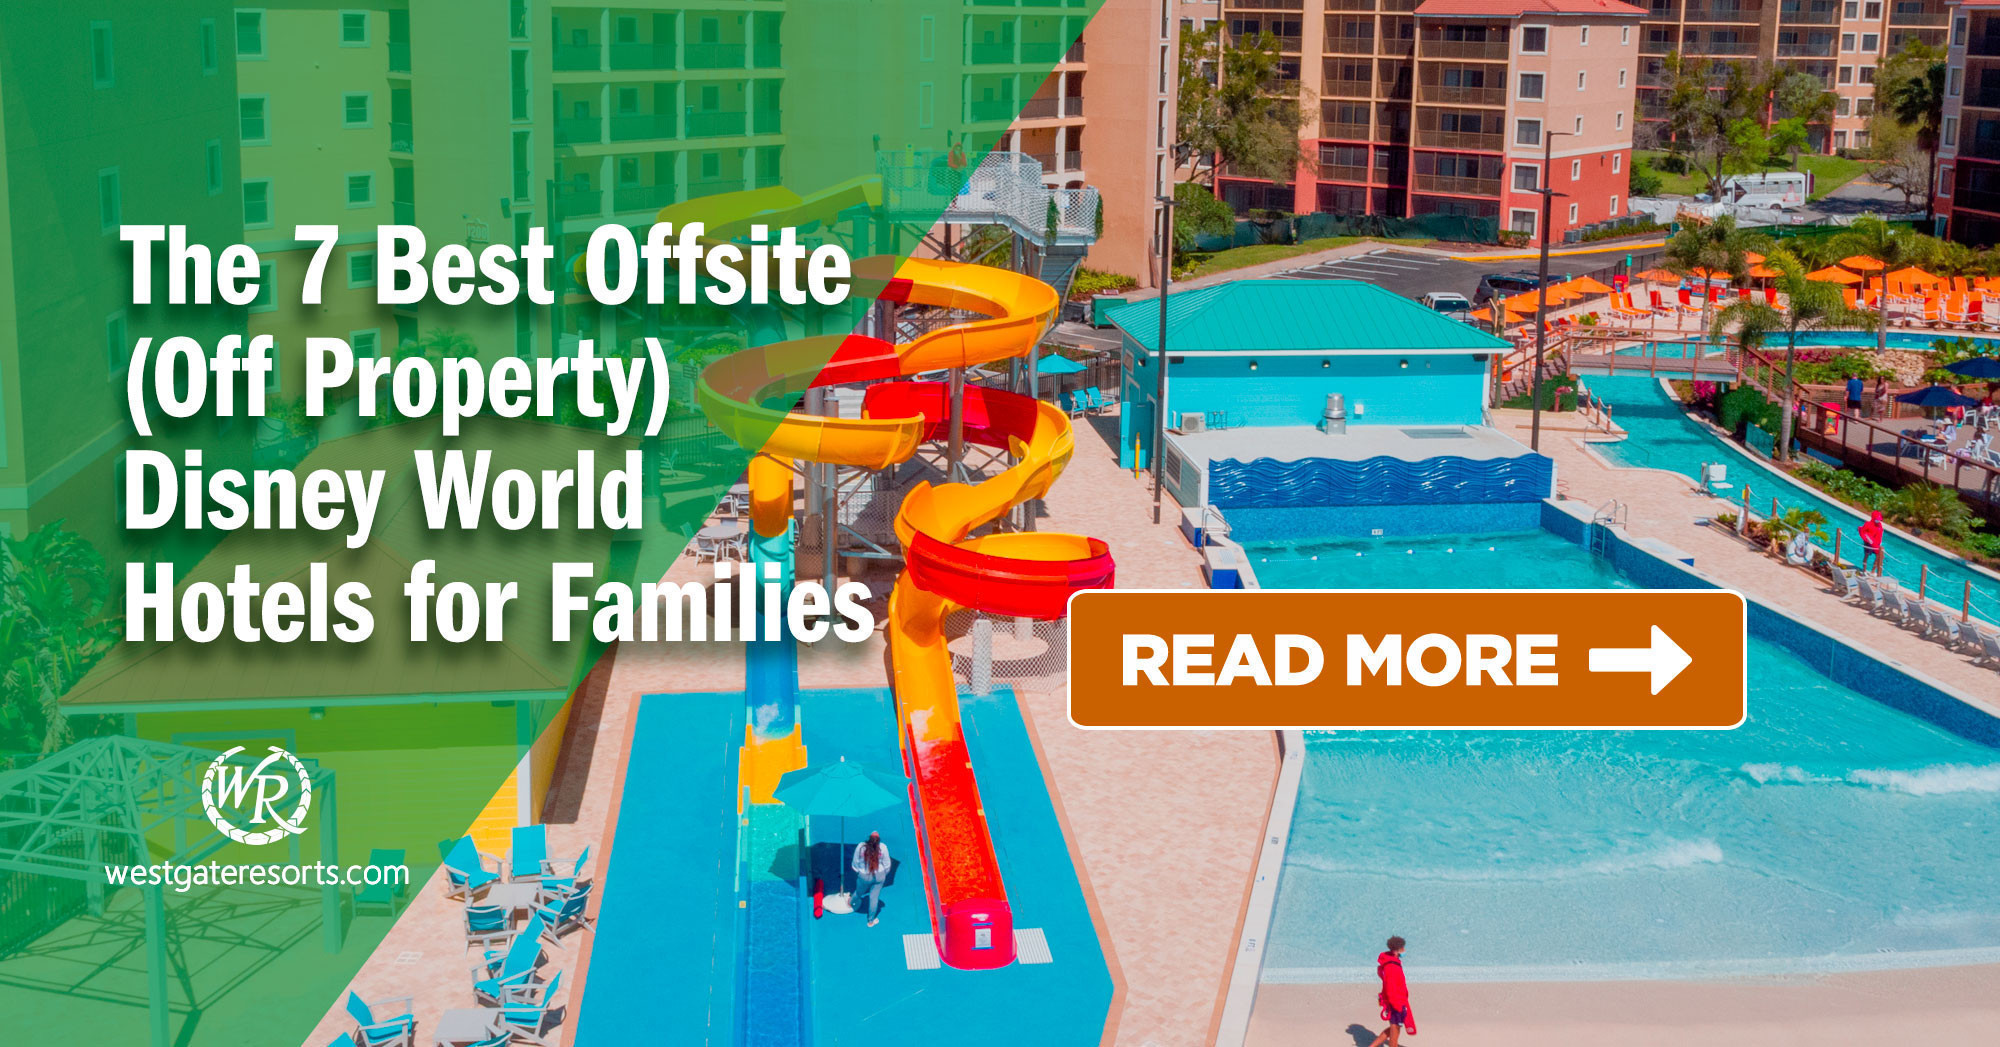 The 7 Best Offsite (Off Property) Disney World Hotels for Families